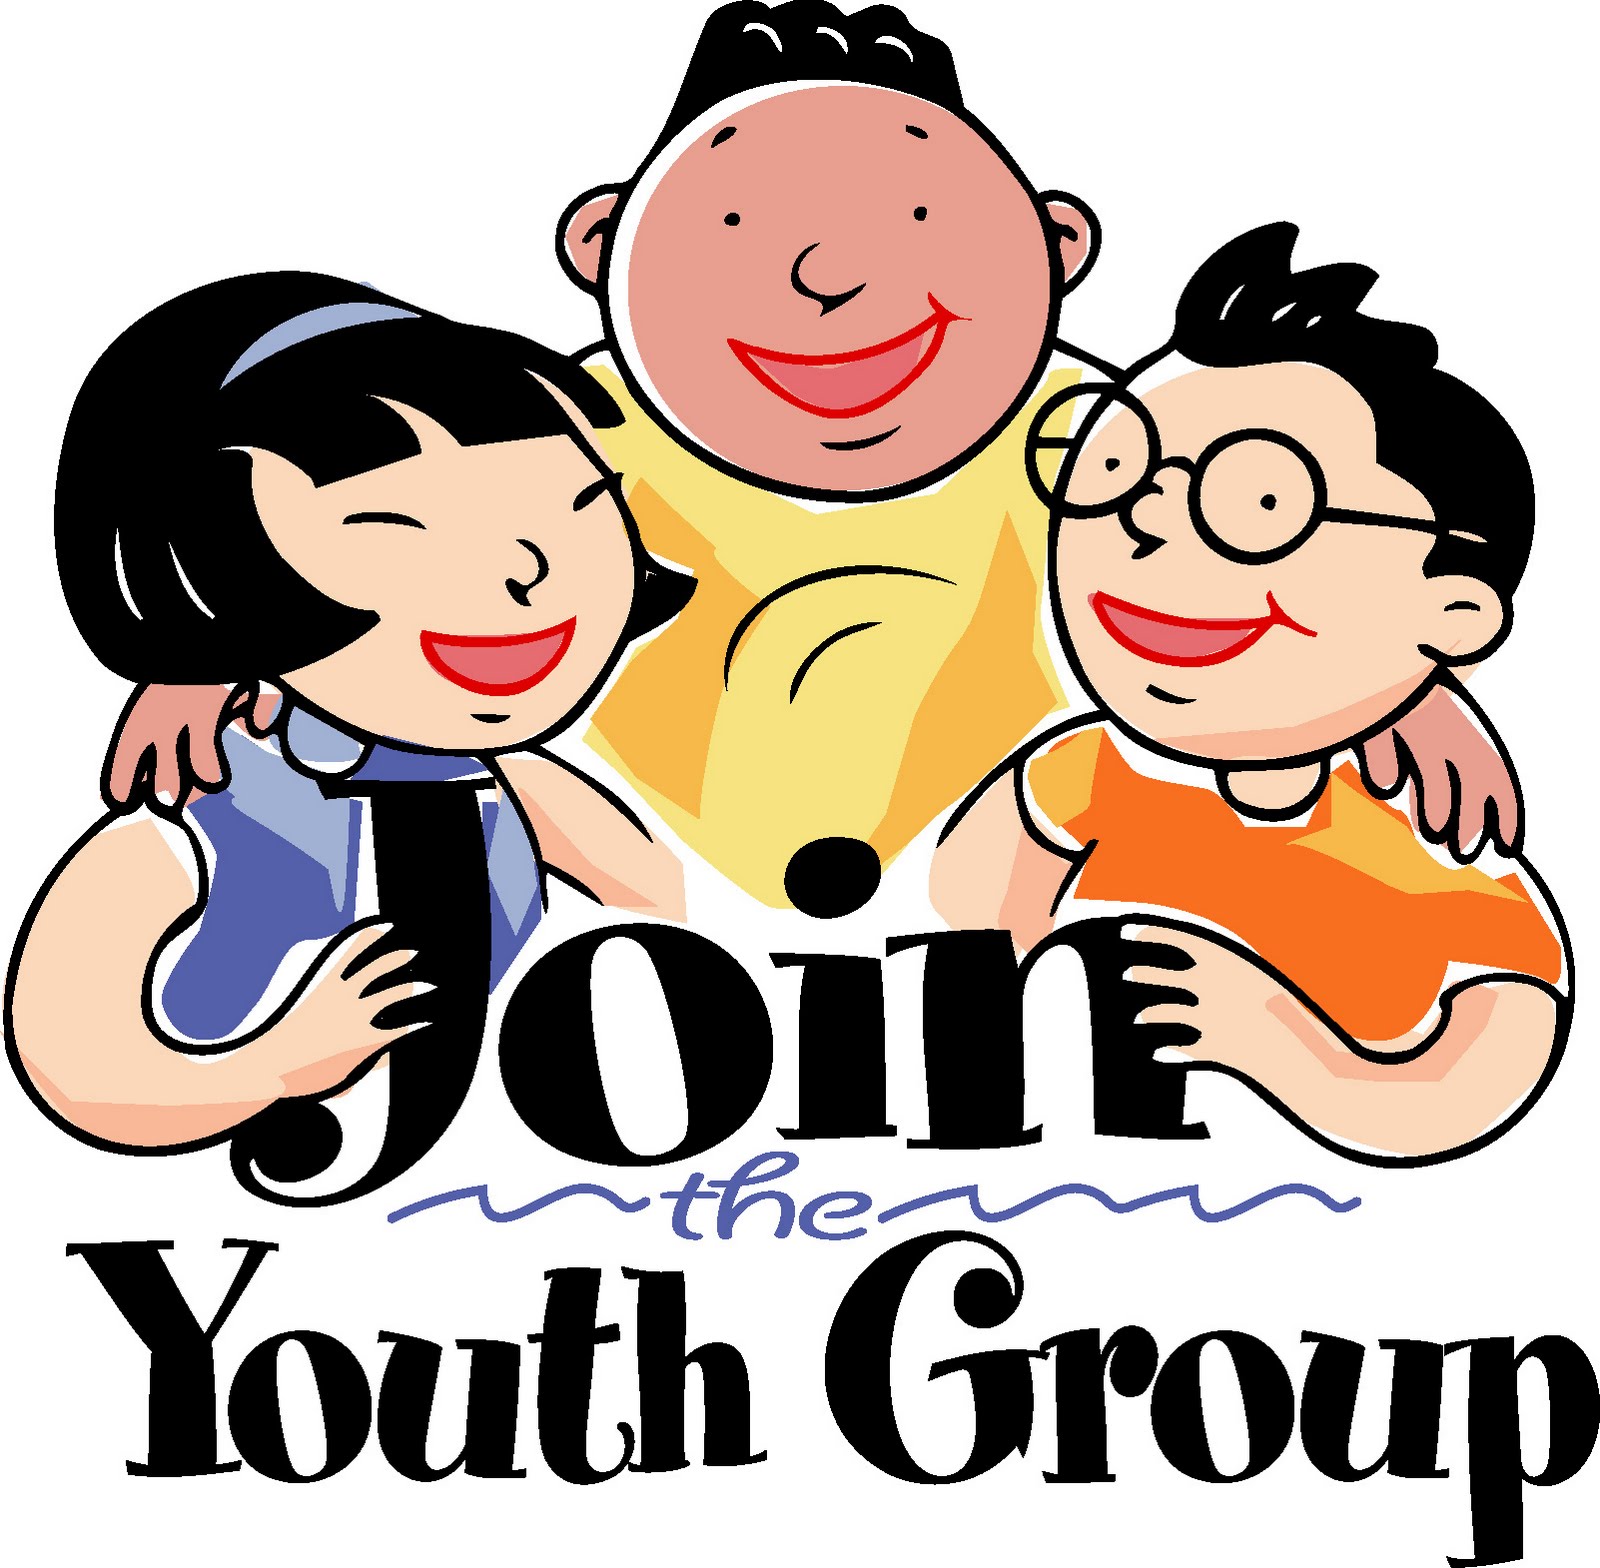 free christian youth ministry clipart - photo #33